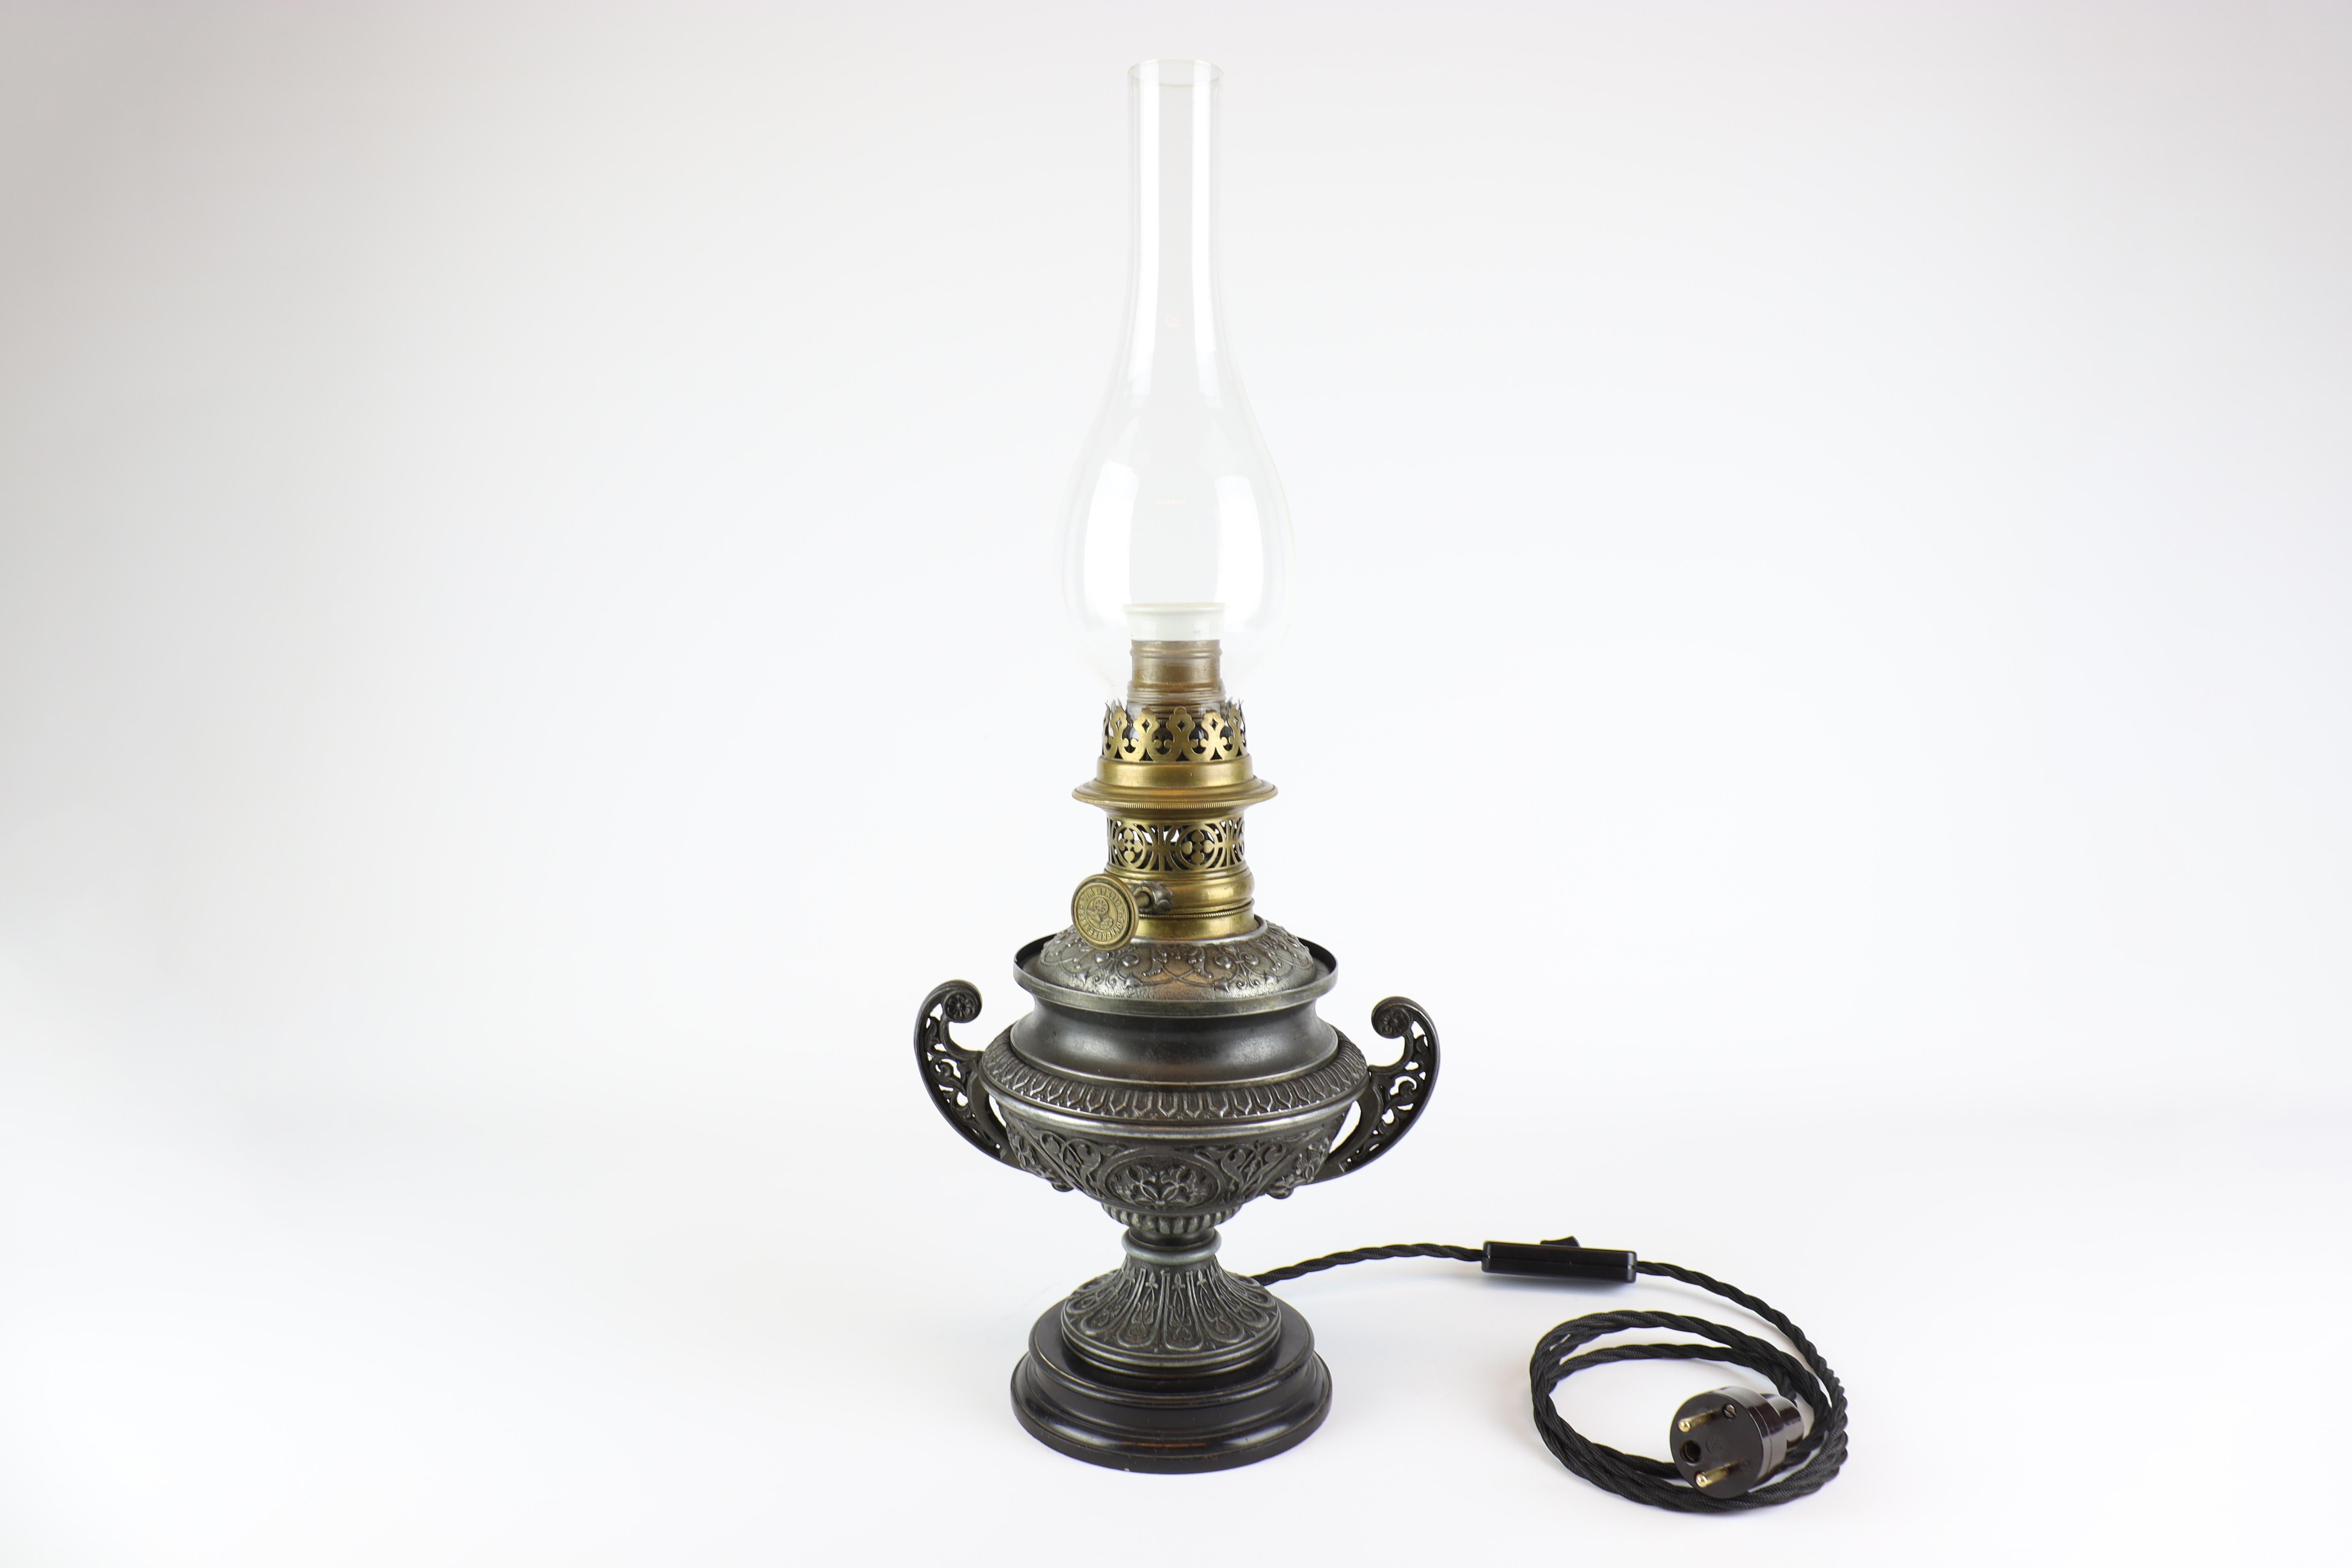 This beautiful processing of a kerosene lamp was created in the workshops of the Viennese company R.DITMAR WIEN, which in its time specialized in the production of kerosene lamps. Specifically, this lamp was made around 1900, it is in its original